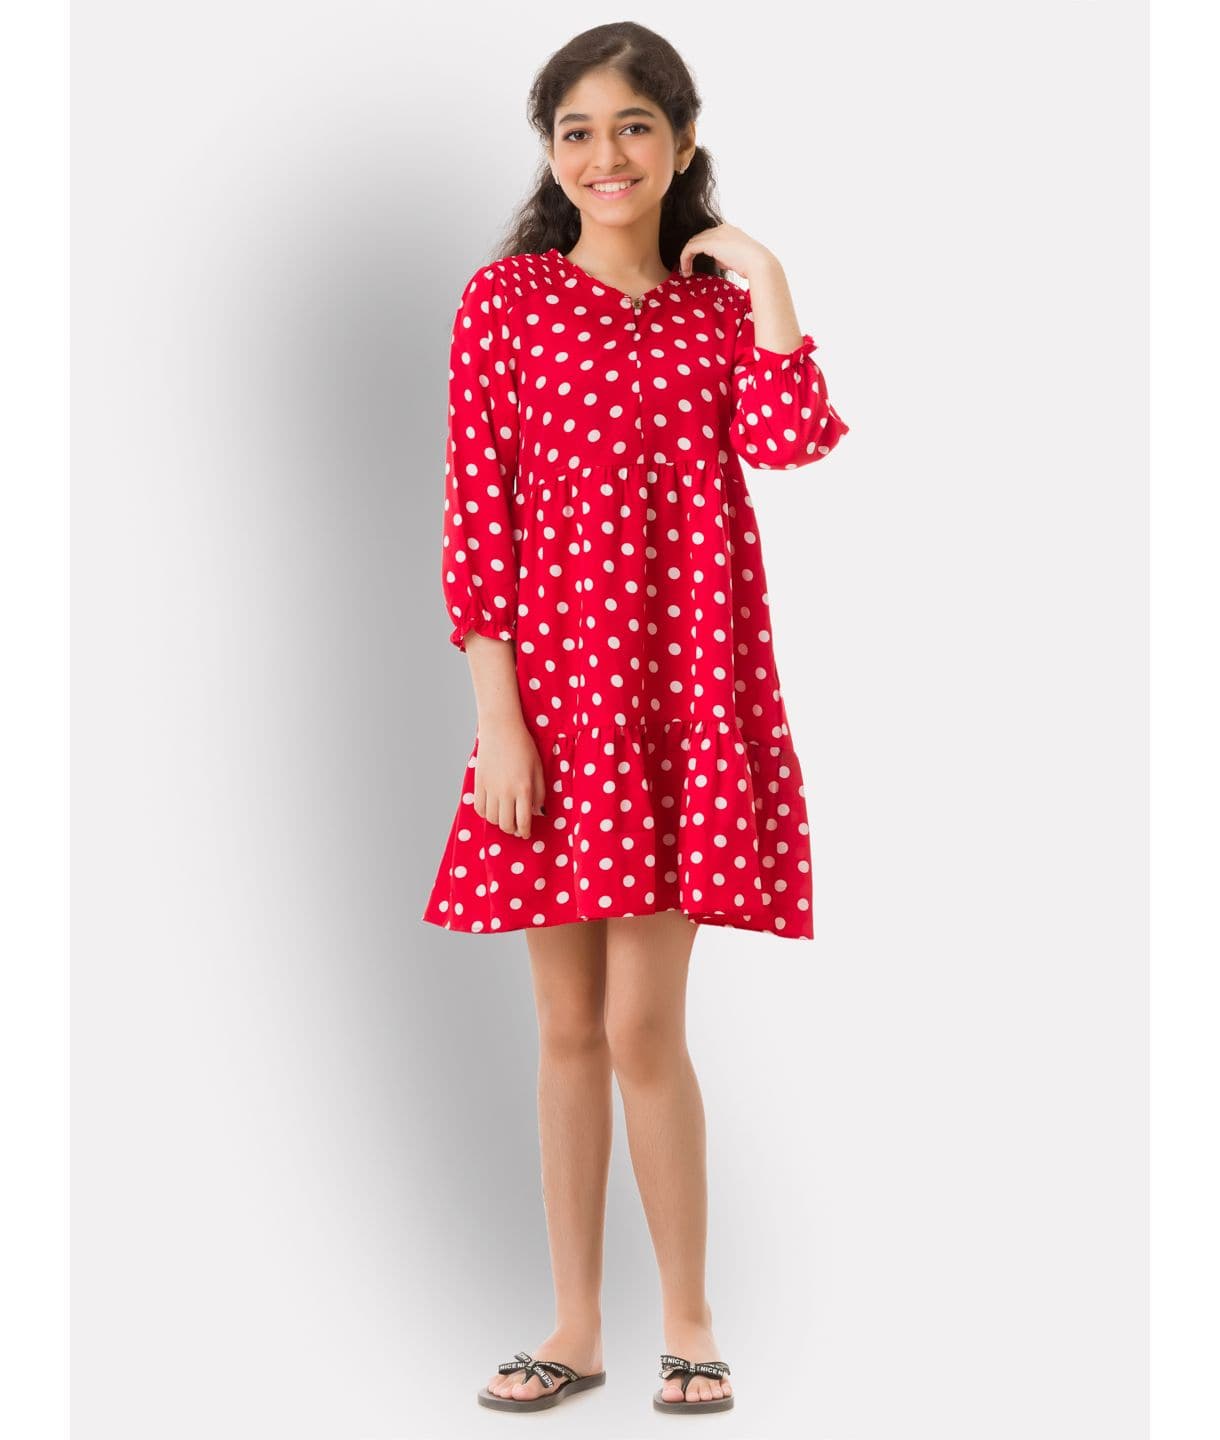 Cotton 3/4th Sleeves Dress for Girls - Uptownie